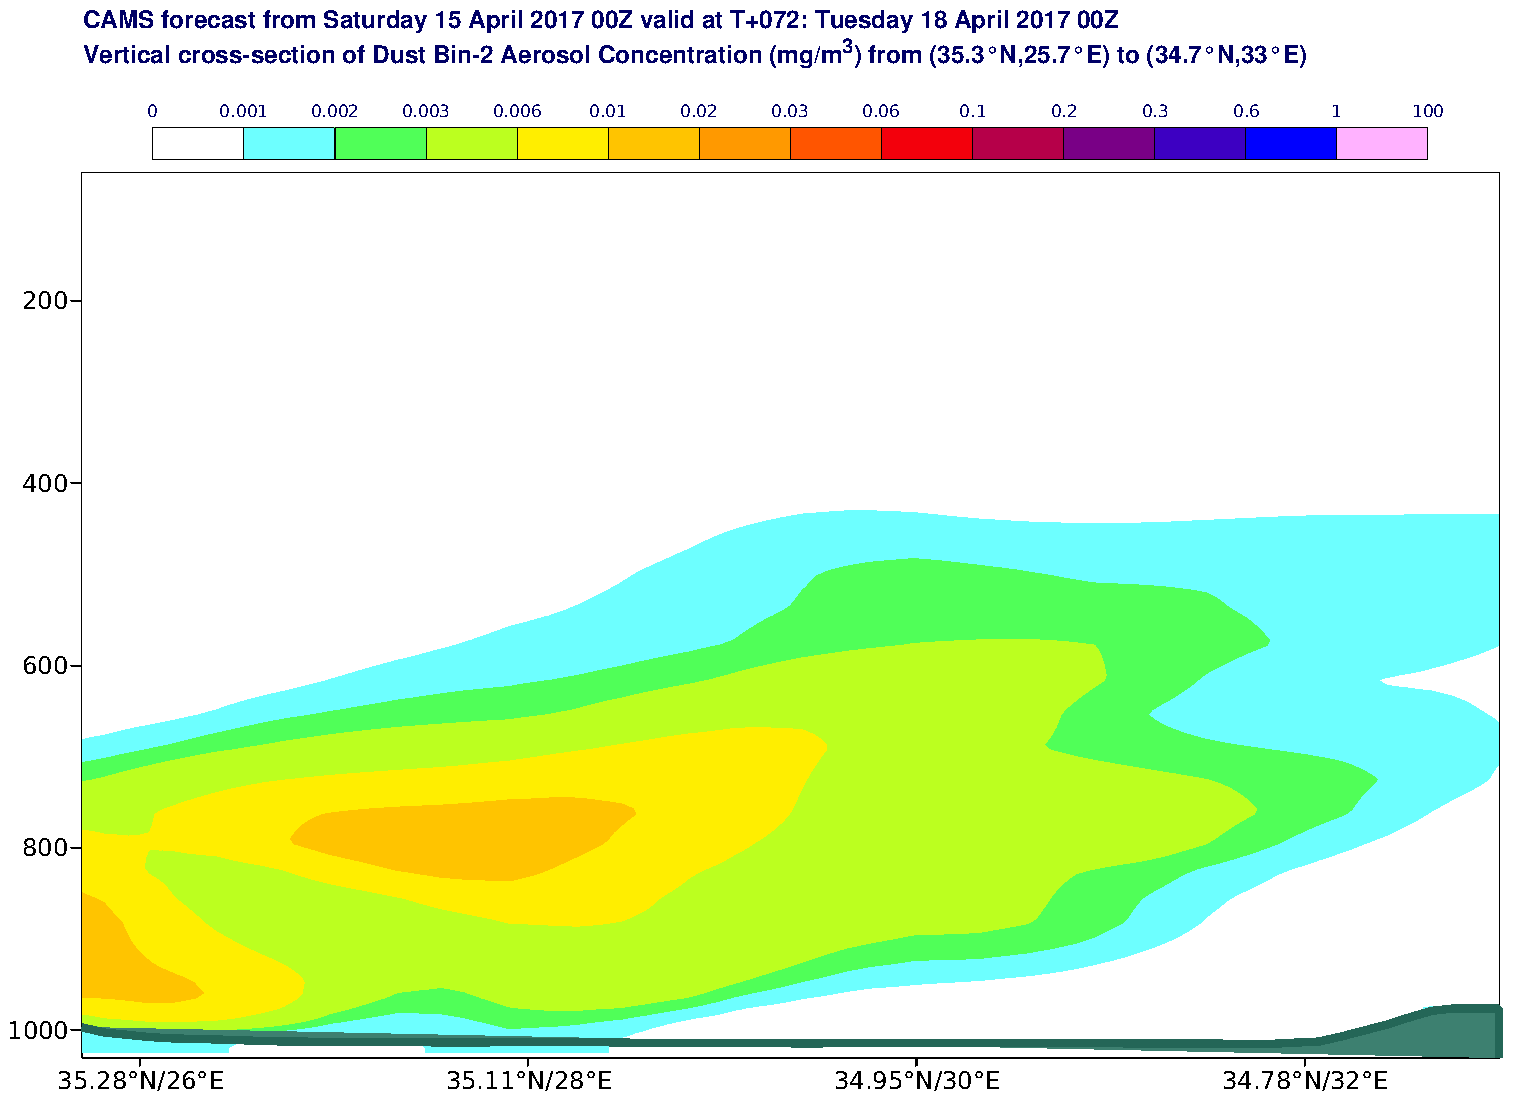 Vertical cross-section of Dust Bin-2 Aerosol Concentration (mg/m3) valid at T72 - 2017-04-18 00:00